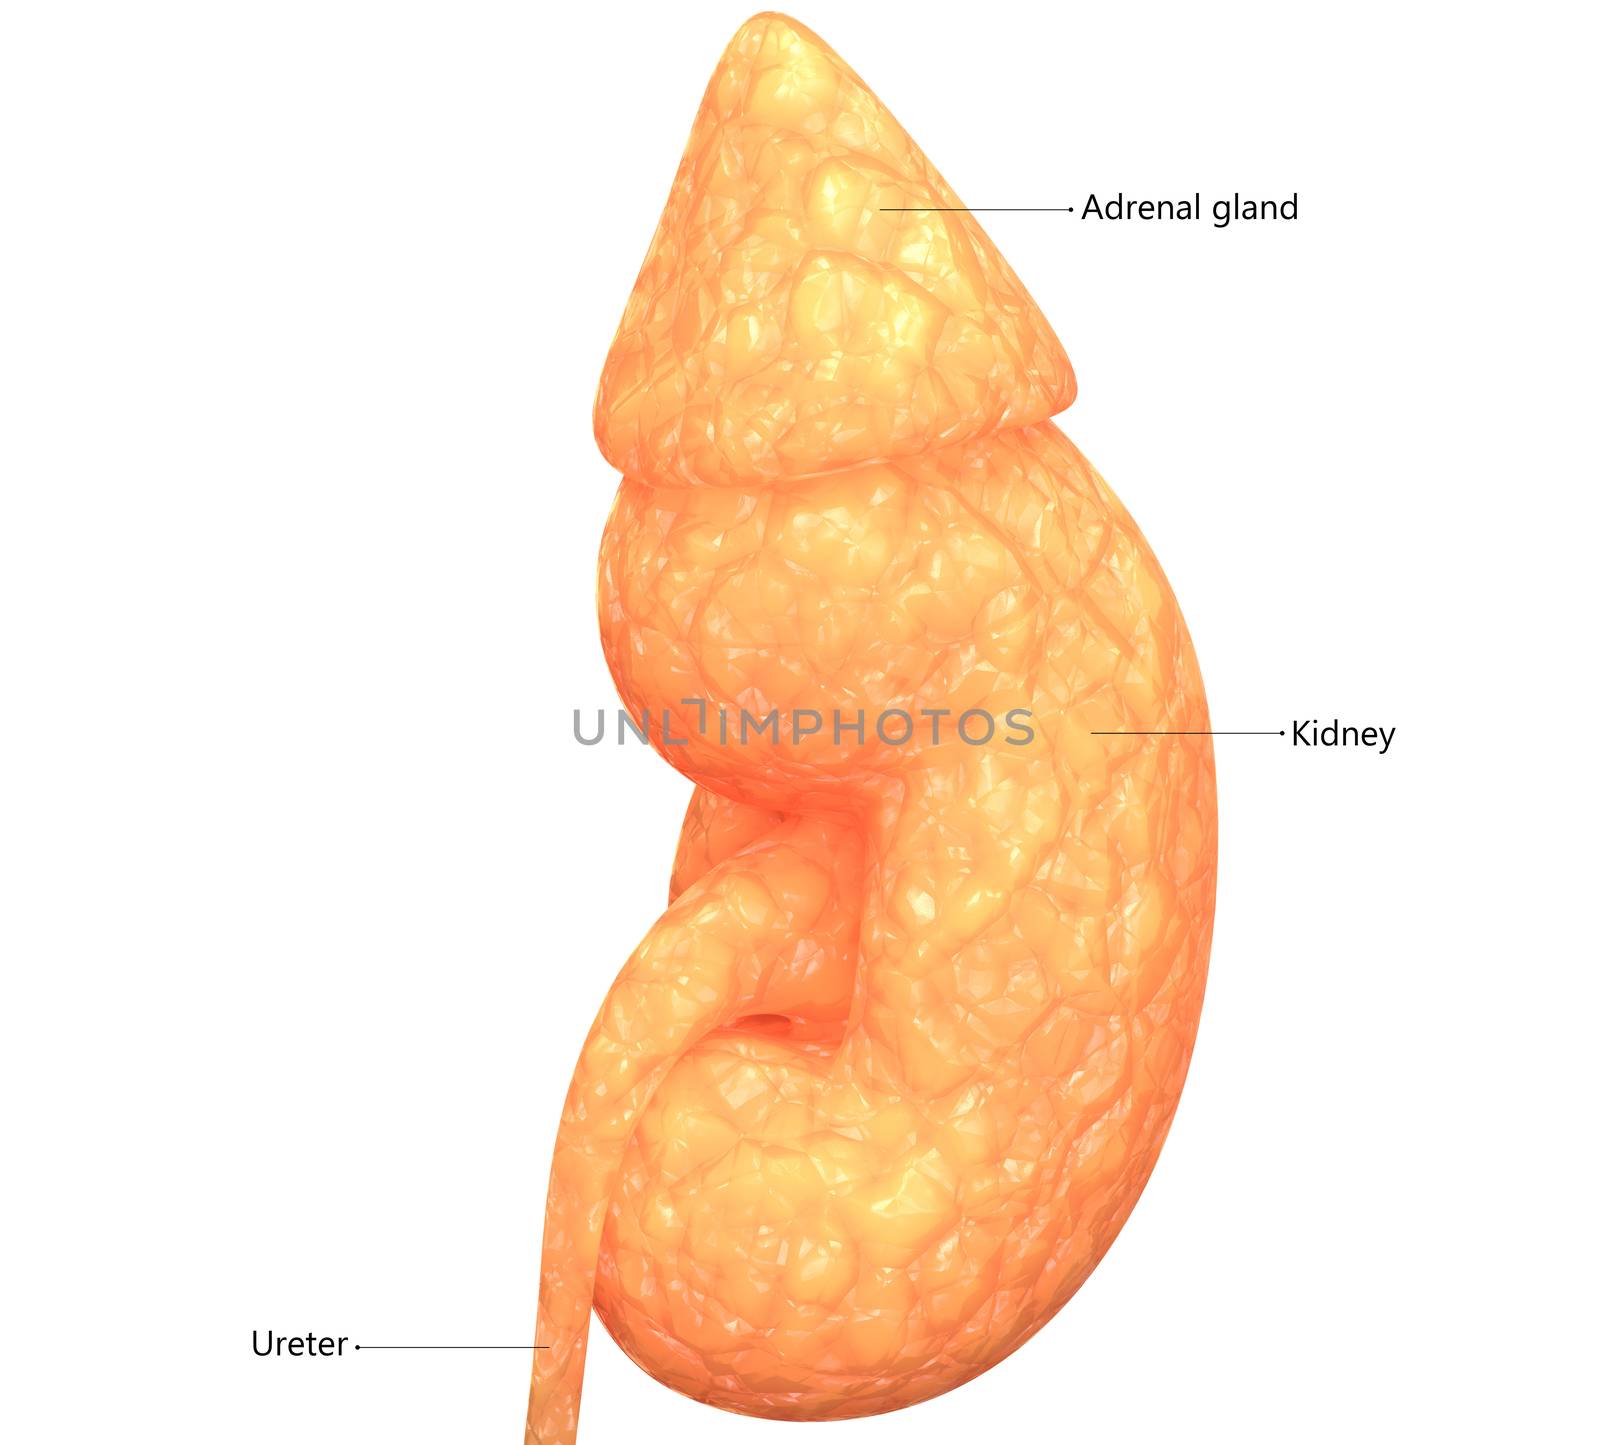 3D Illustration Concept of Human Urinary System Kidney Described with Labels Anatomy